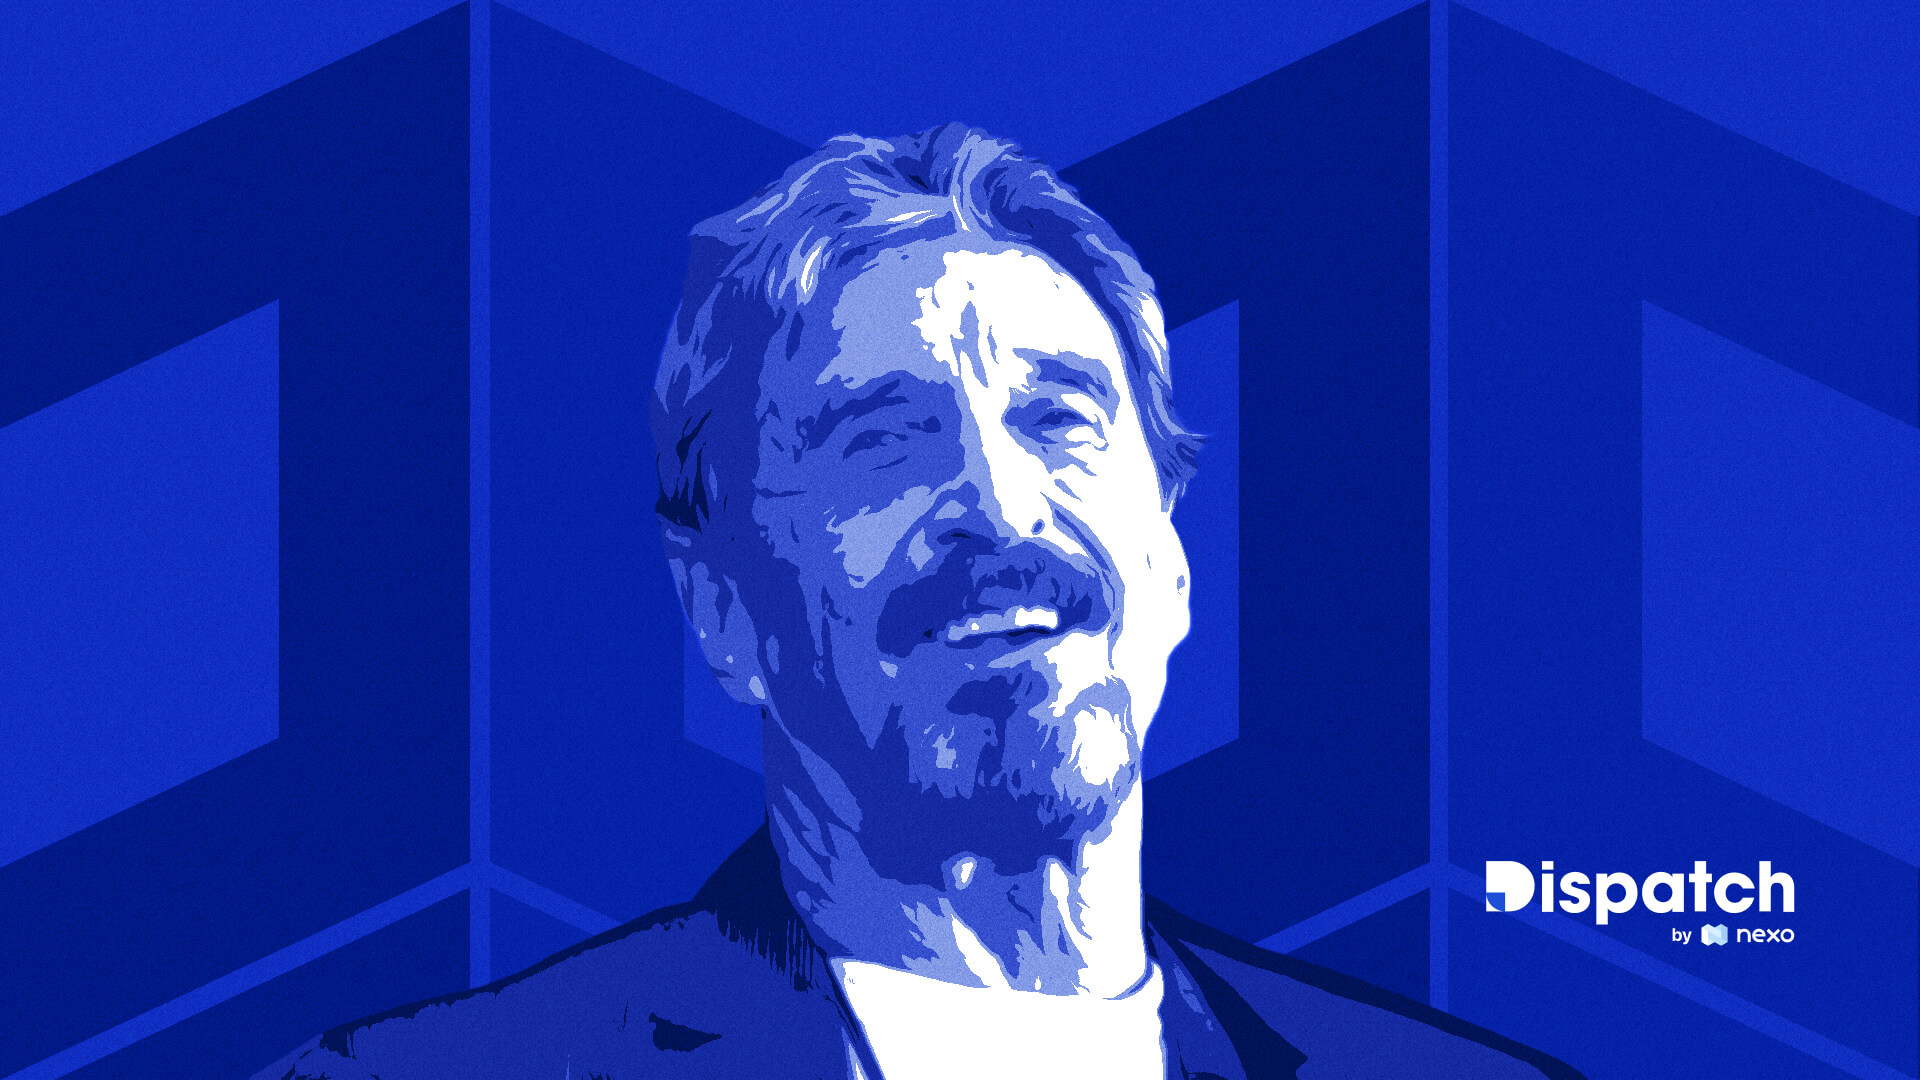 Dispatch #41: The End of John McAfee